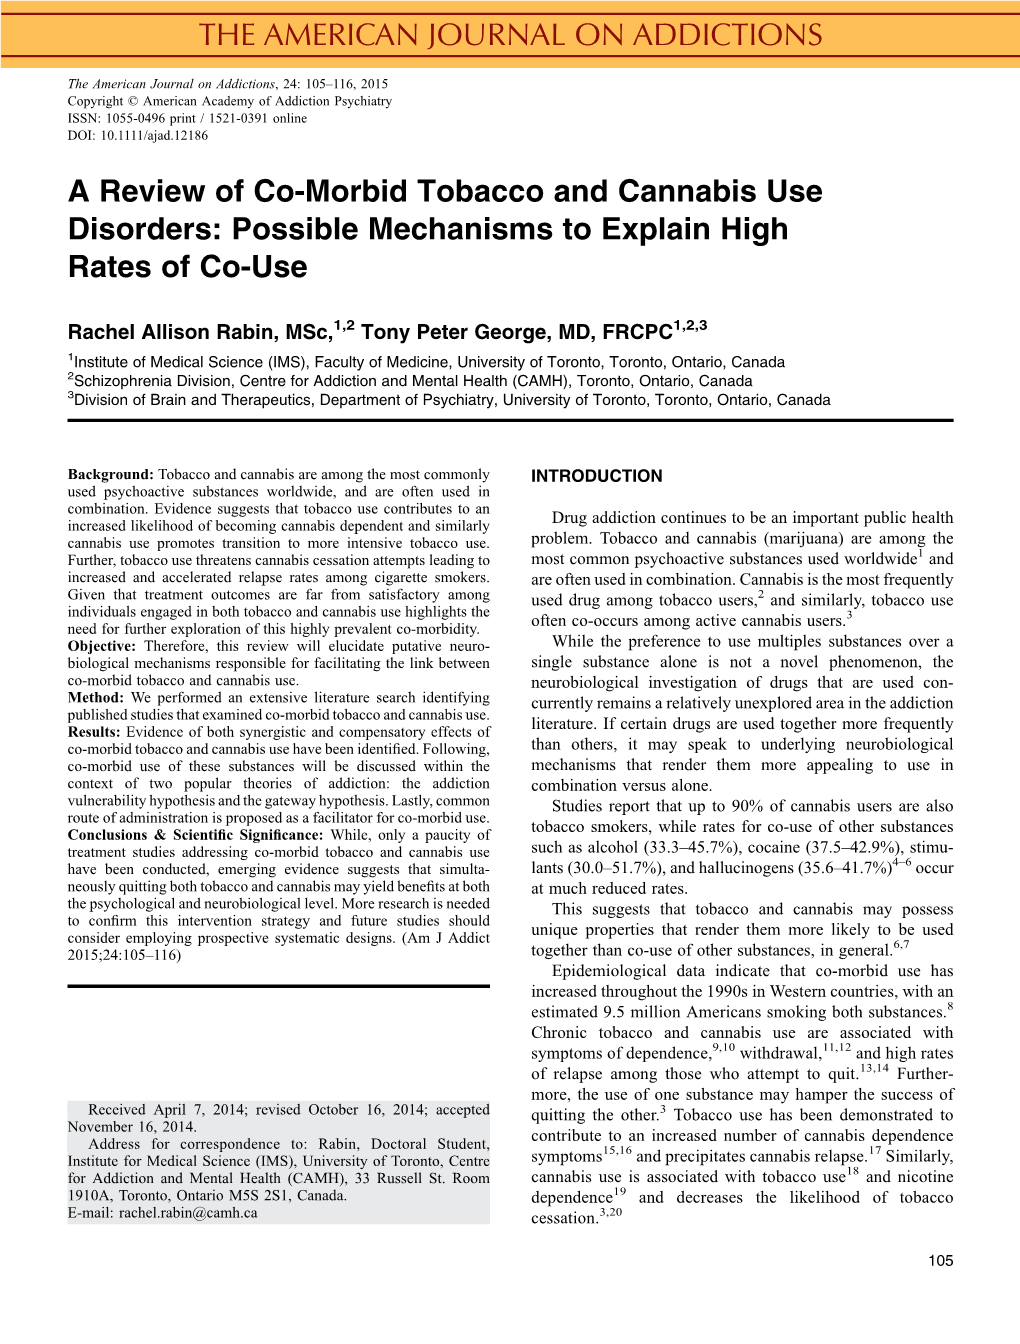 A Review of Co-Morbid Tobacco and Cannabis Use Disorders: Possible Mechanisms to Explain High Rates of Co-Use